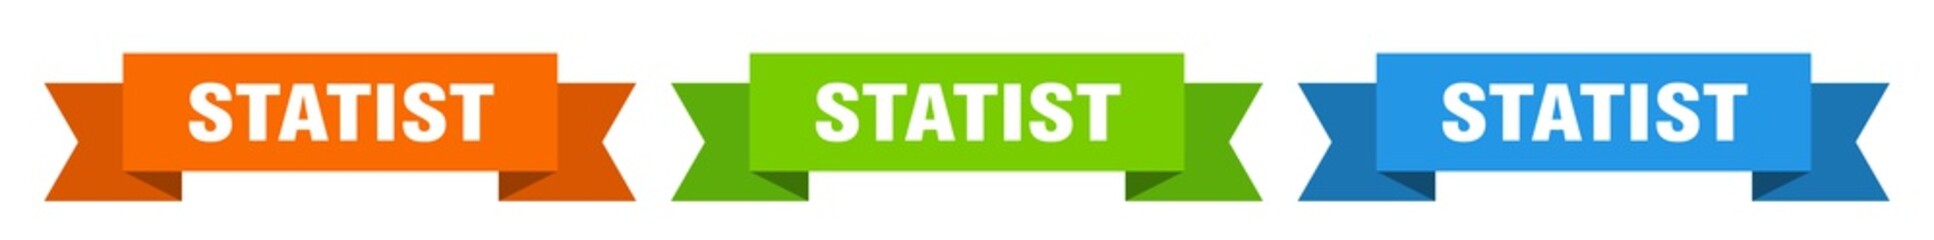 statist ribbon. statist isolated paper sign. banner